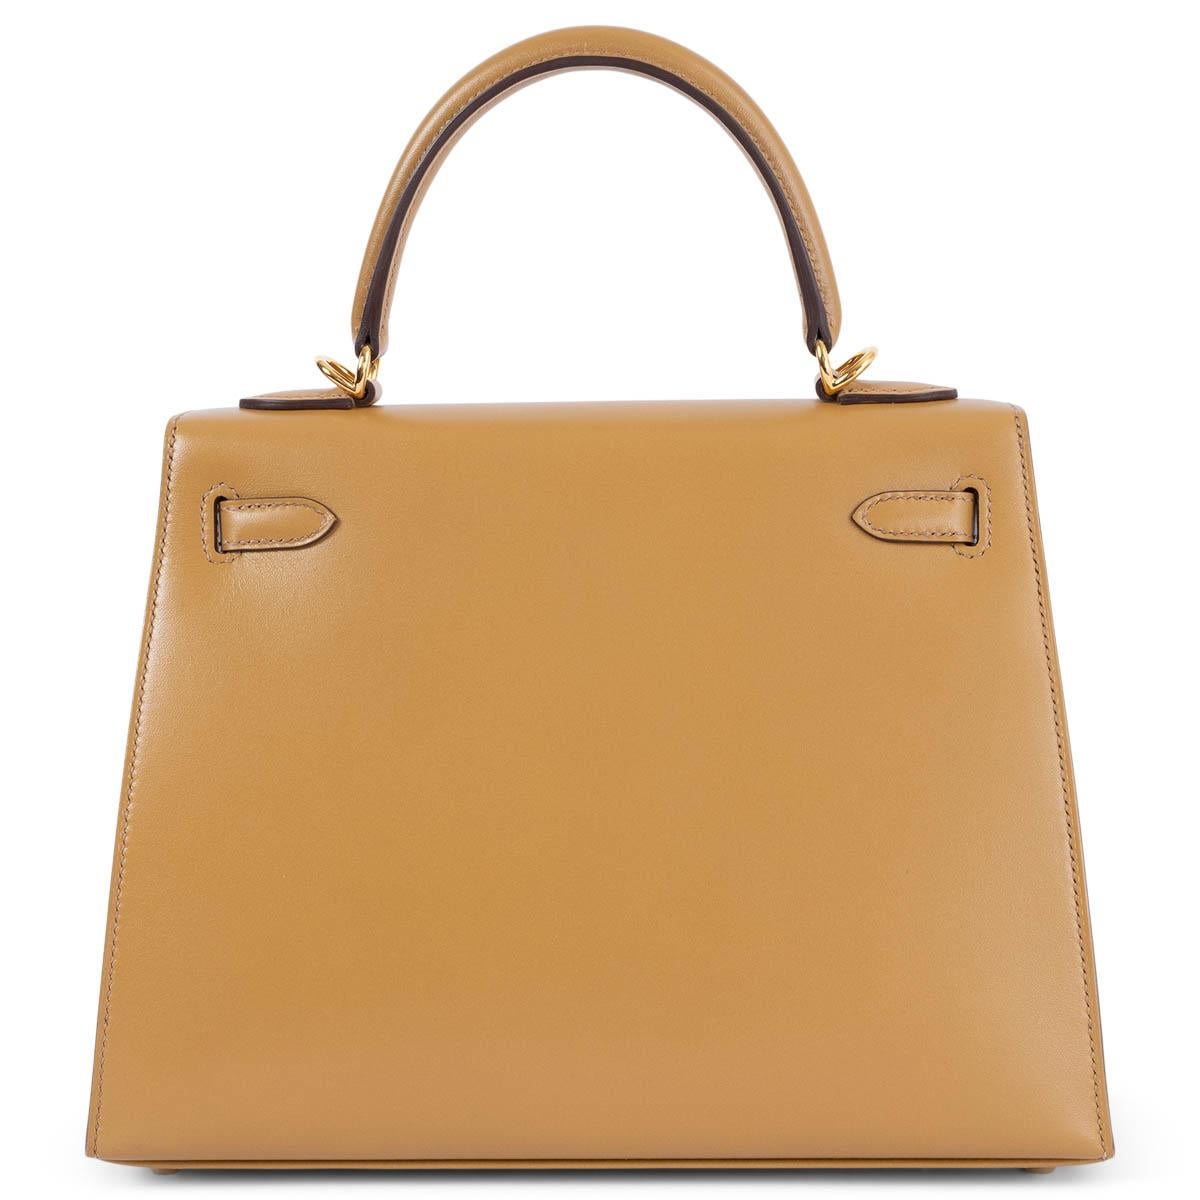 HERMES Poussiere beige Tadelakt leather KELLY 25 SELLIER Bag Ghw In New Condition For Sale In Zürich, CH